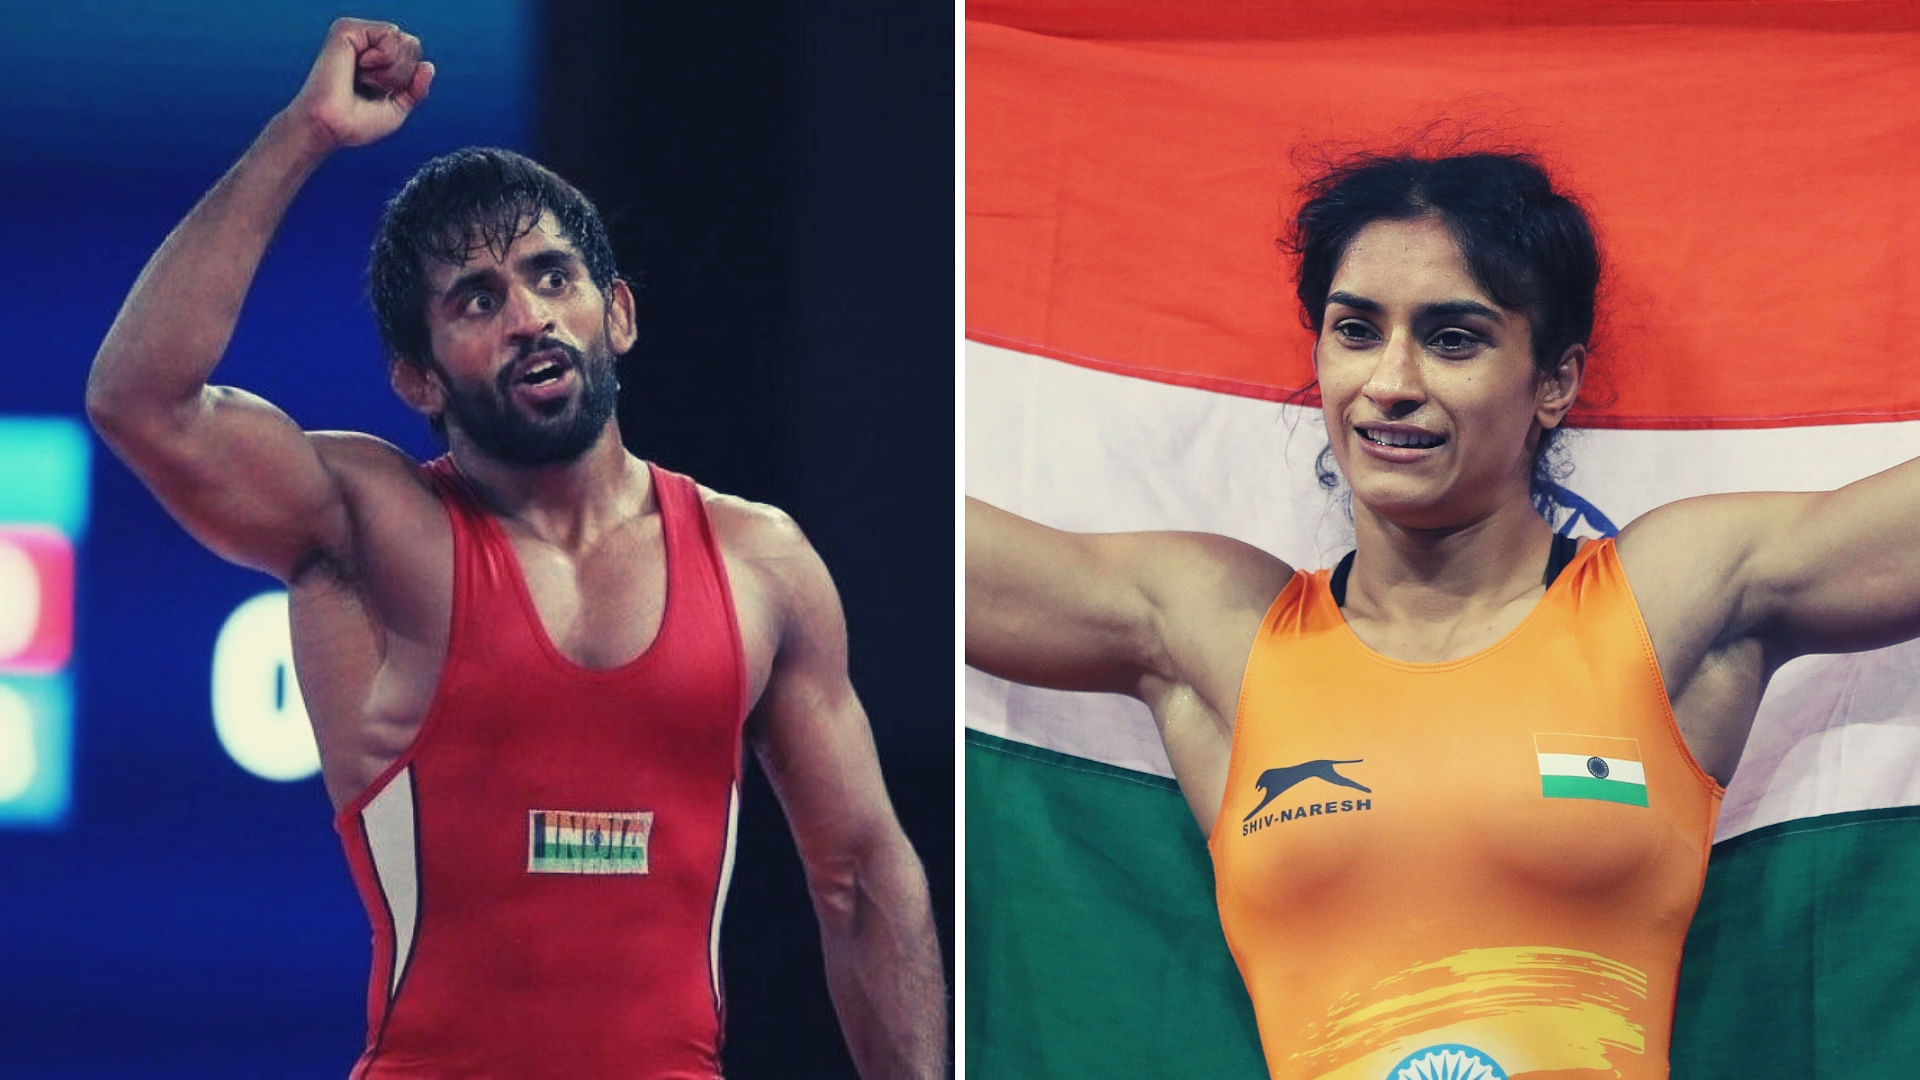 Both Bajrang Punia and Vinesh Phogat have criticised the state government for the move.